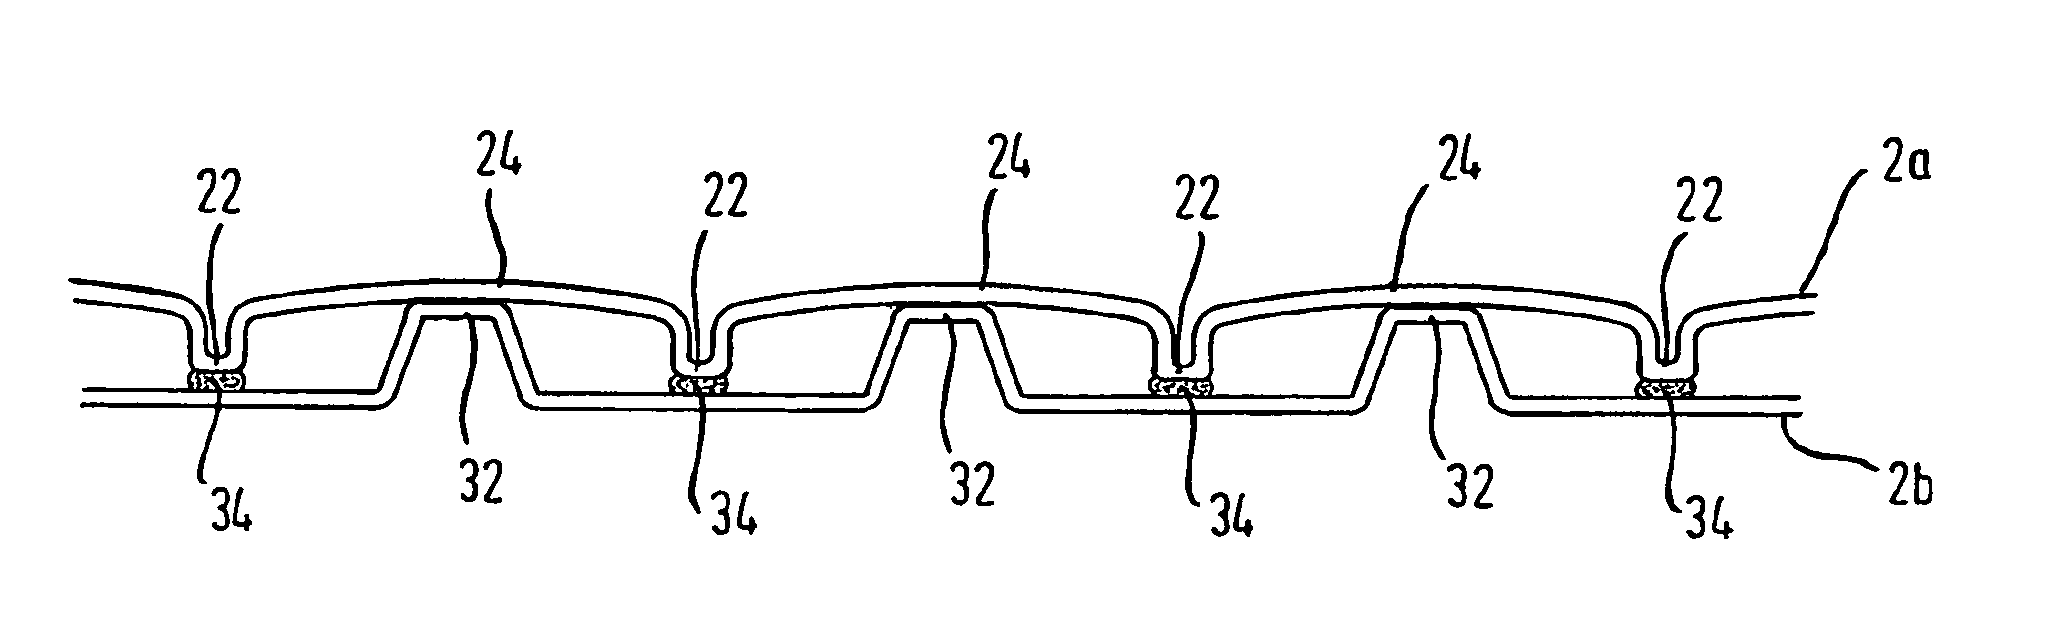 Multi-ply tissue paper, paper converting device and method for producing a multi-ply tissue paper